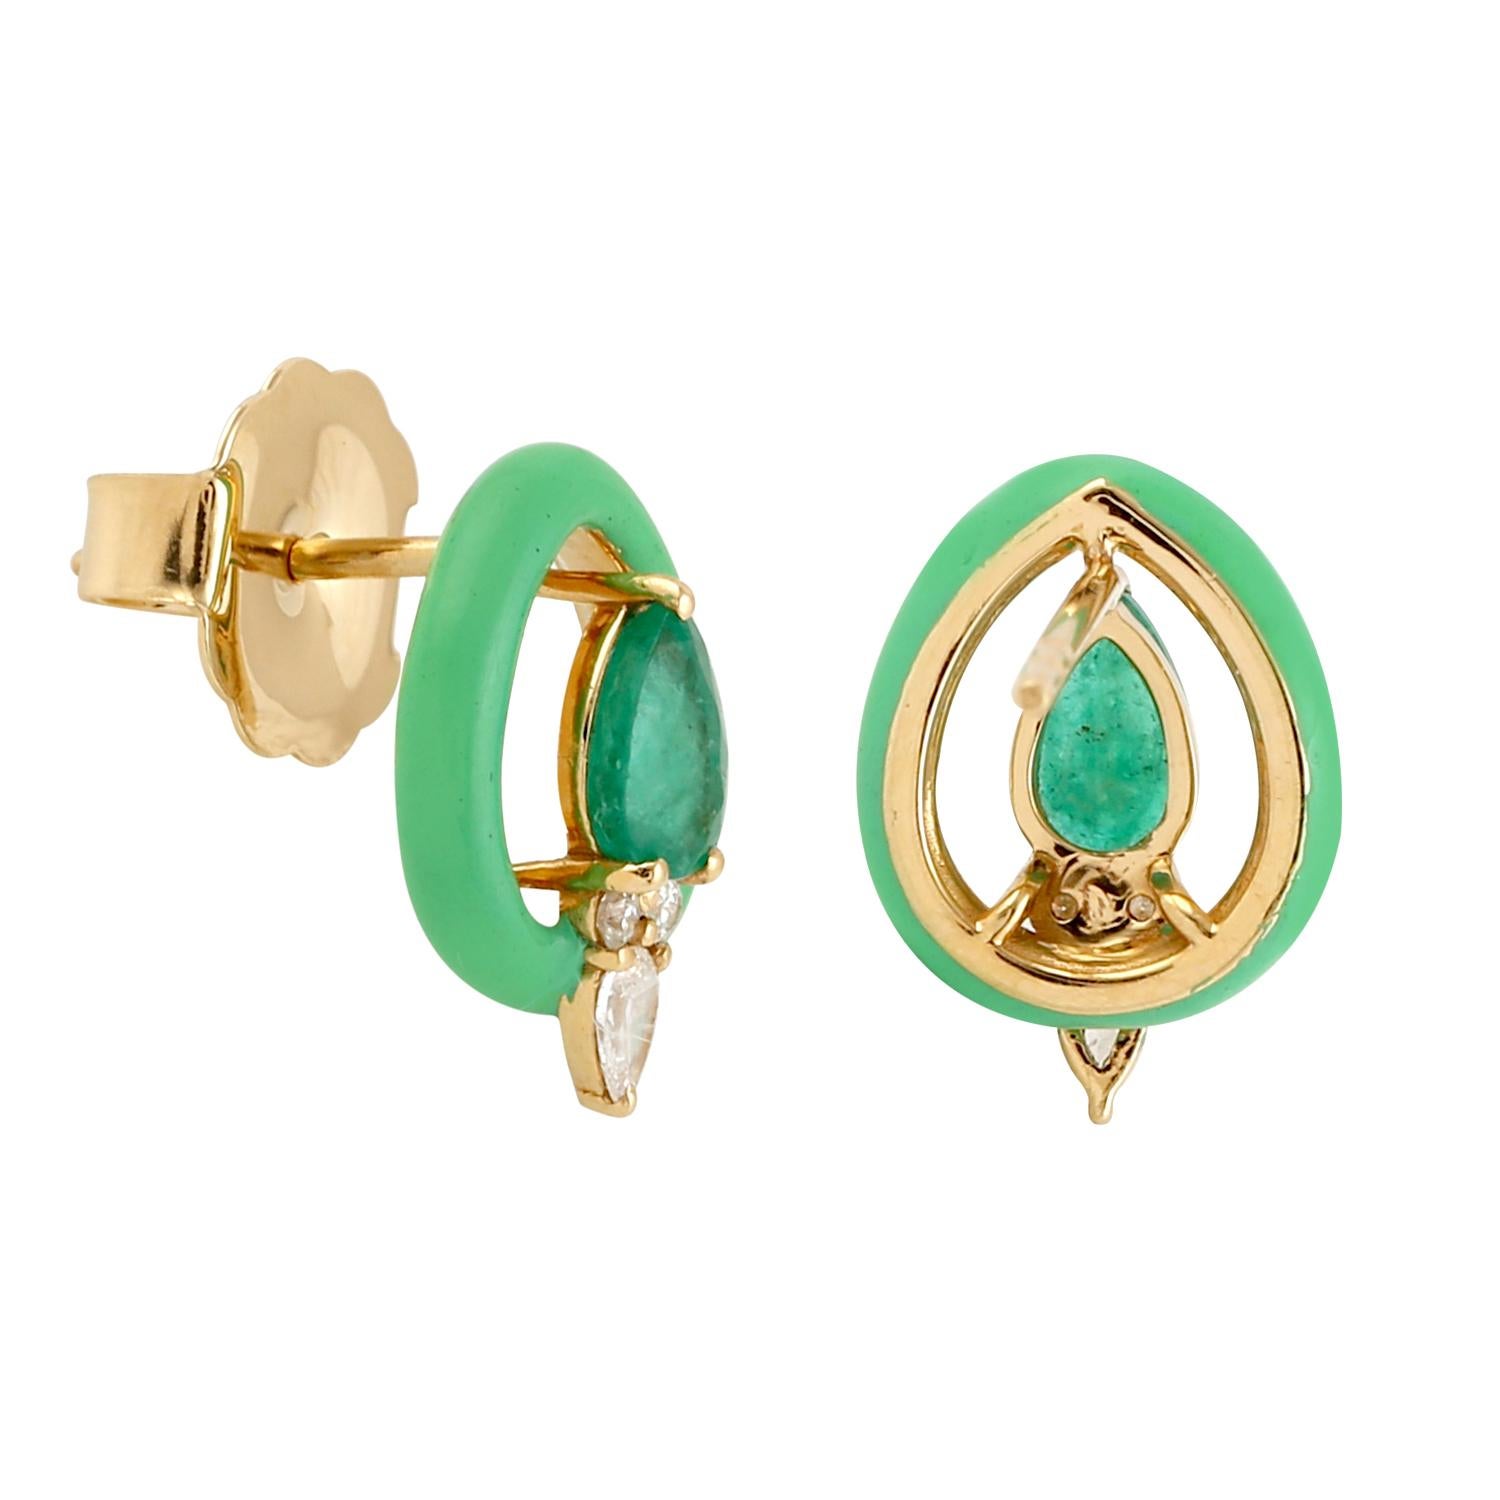 Artisan Pear Shaped Emerald & Enamel Stud Earrings With Diamonds Made In 18k Yellow Gold For Sale